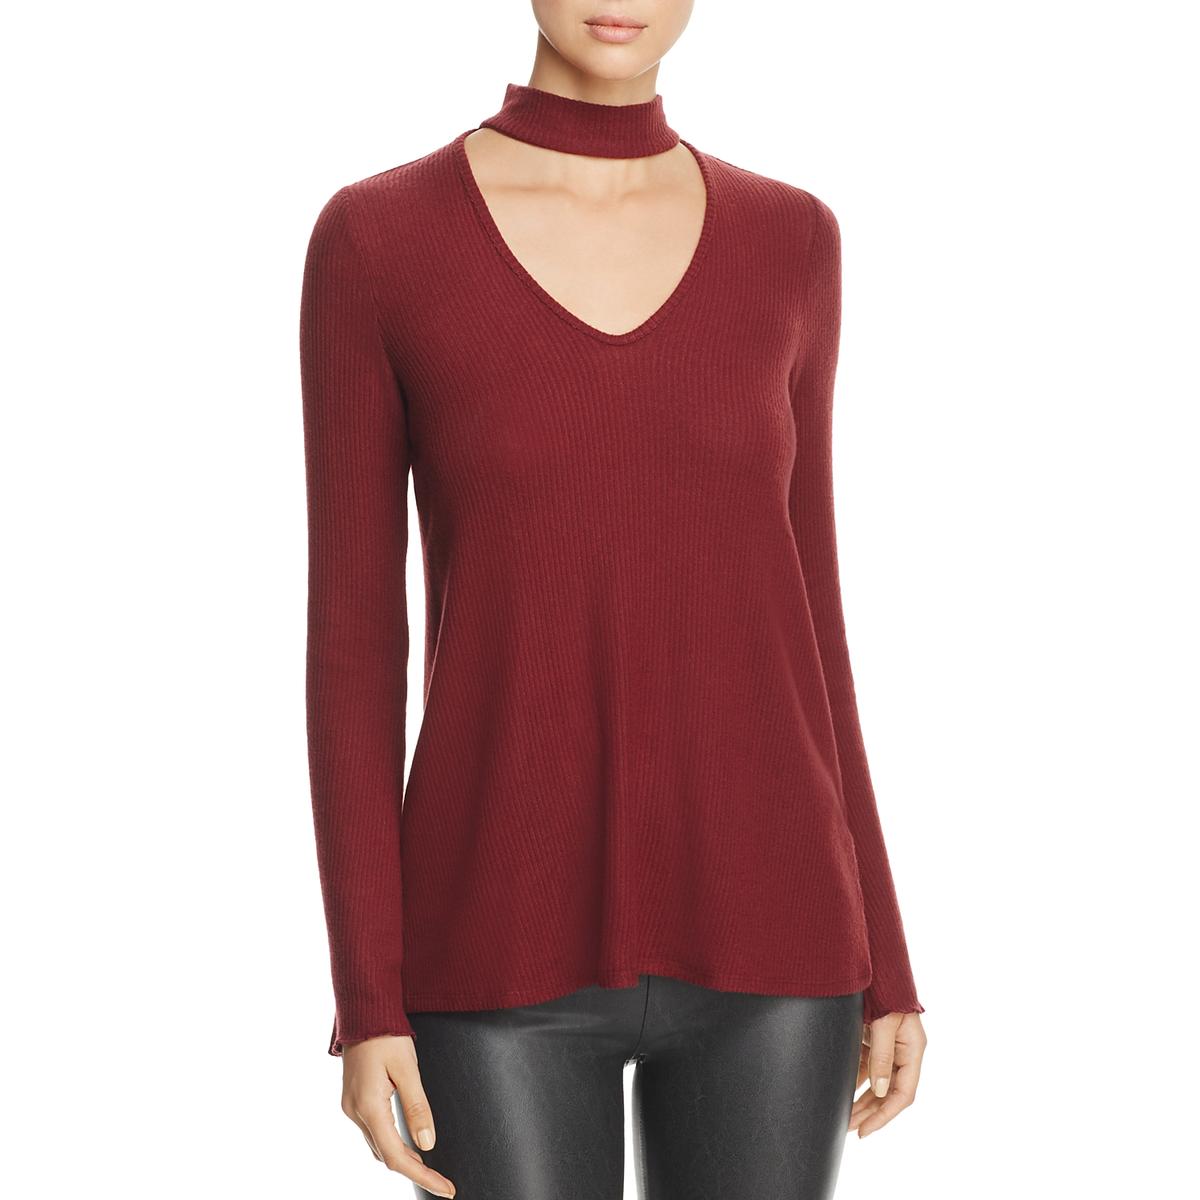 Download Three Dots Womens Red Knit Mock Neck Long Sleeves Pullover ...